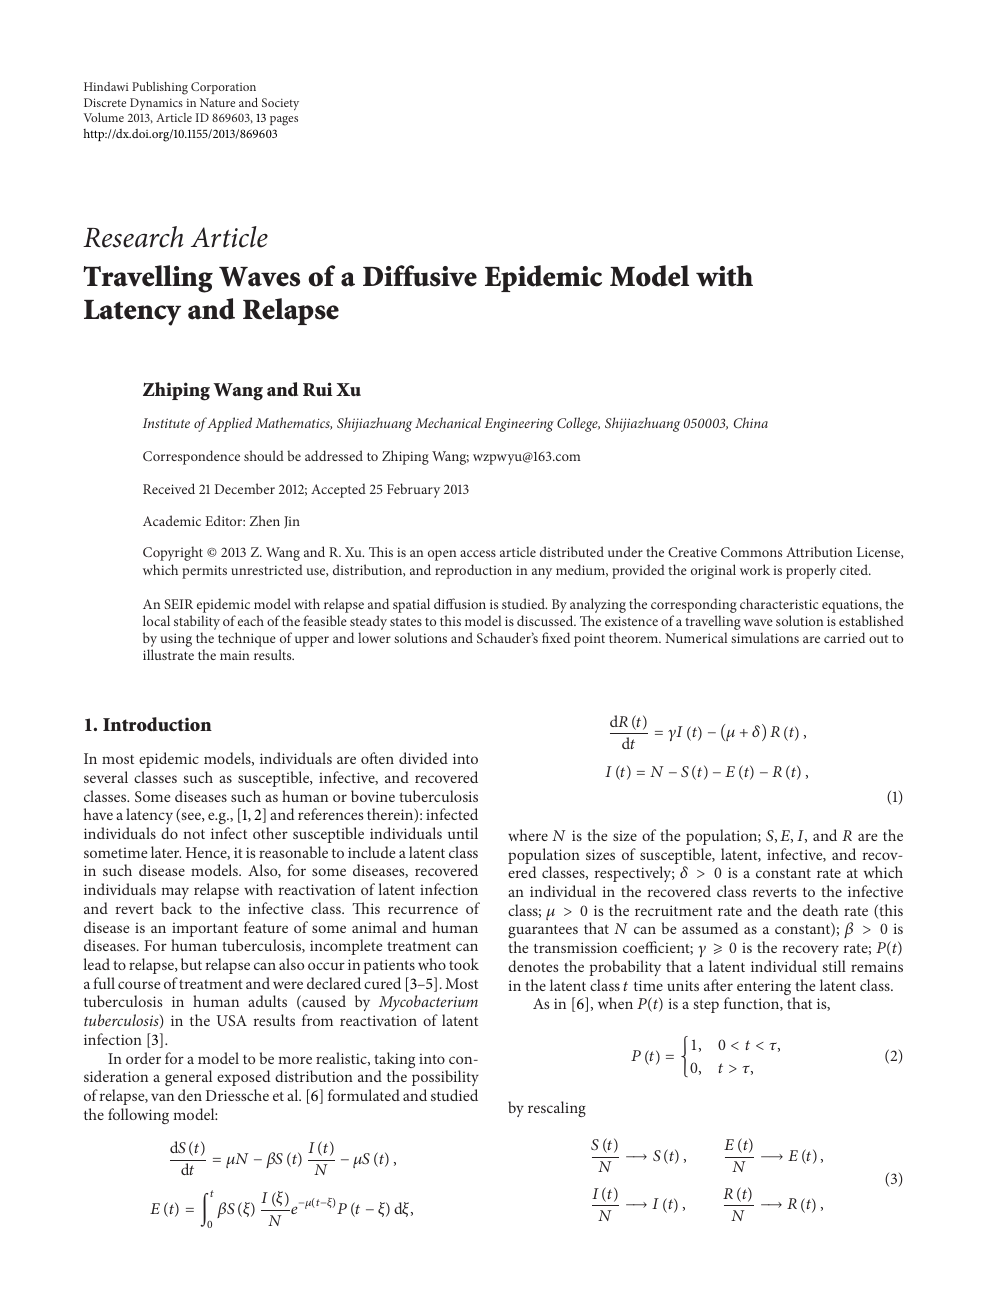 Travelling Waves Of A Diffusive Epidemic Model With Latency And Relapse Topic Of Research Paper In Mathematics Download Scholarly Article Pdf And Read For Free On Cyberleninka Open Science Hub